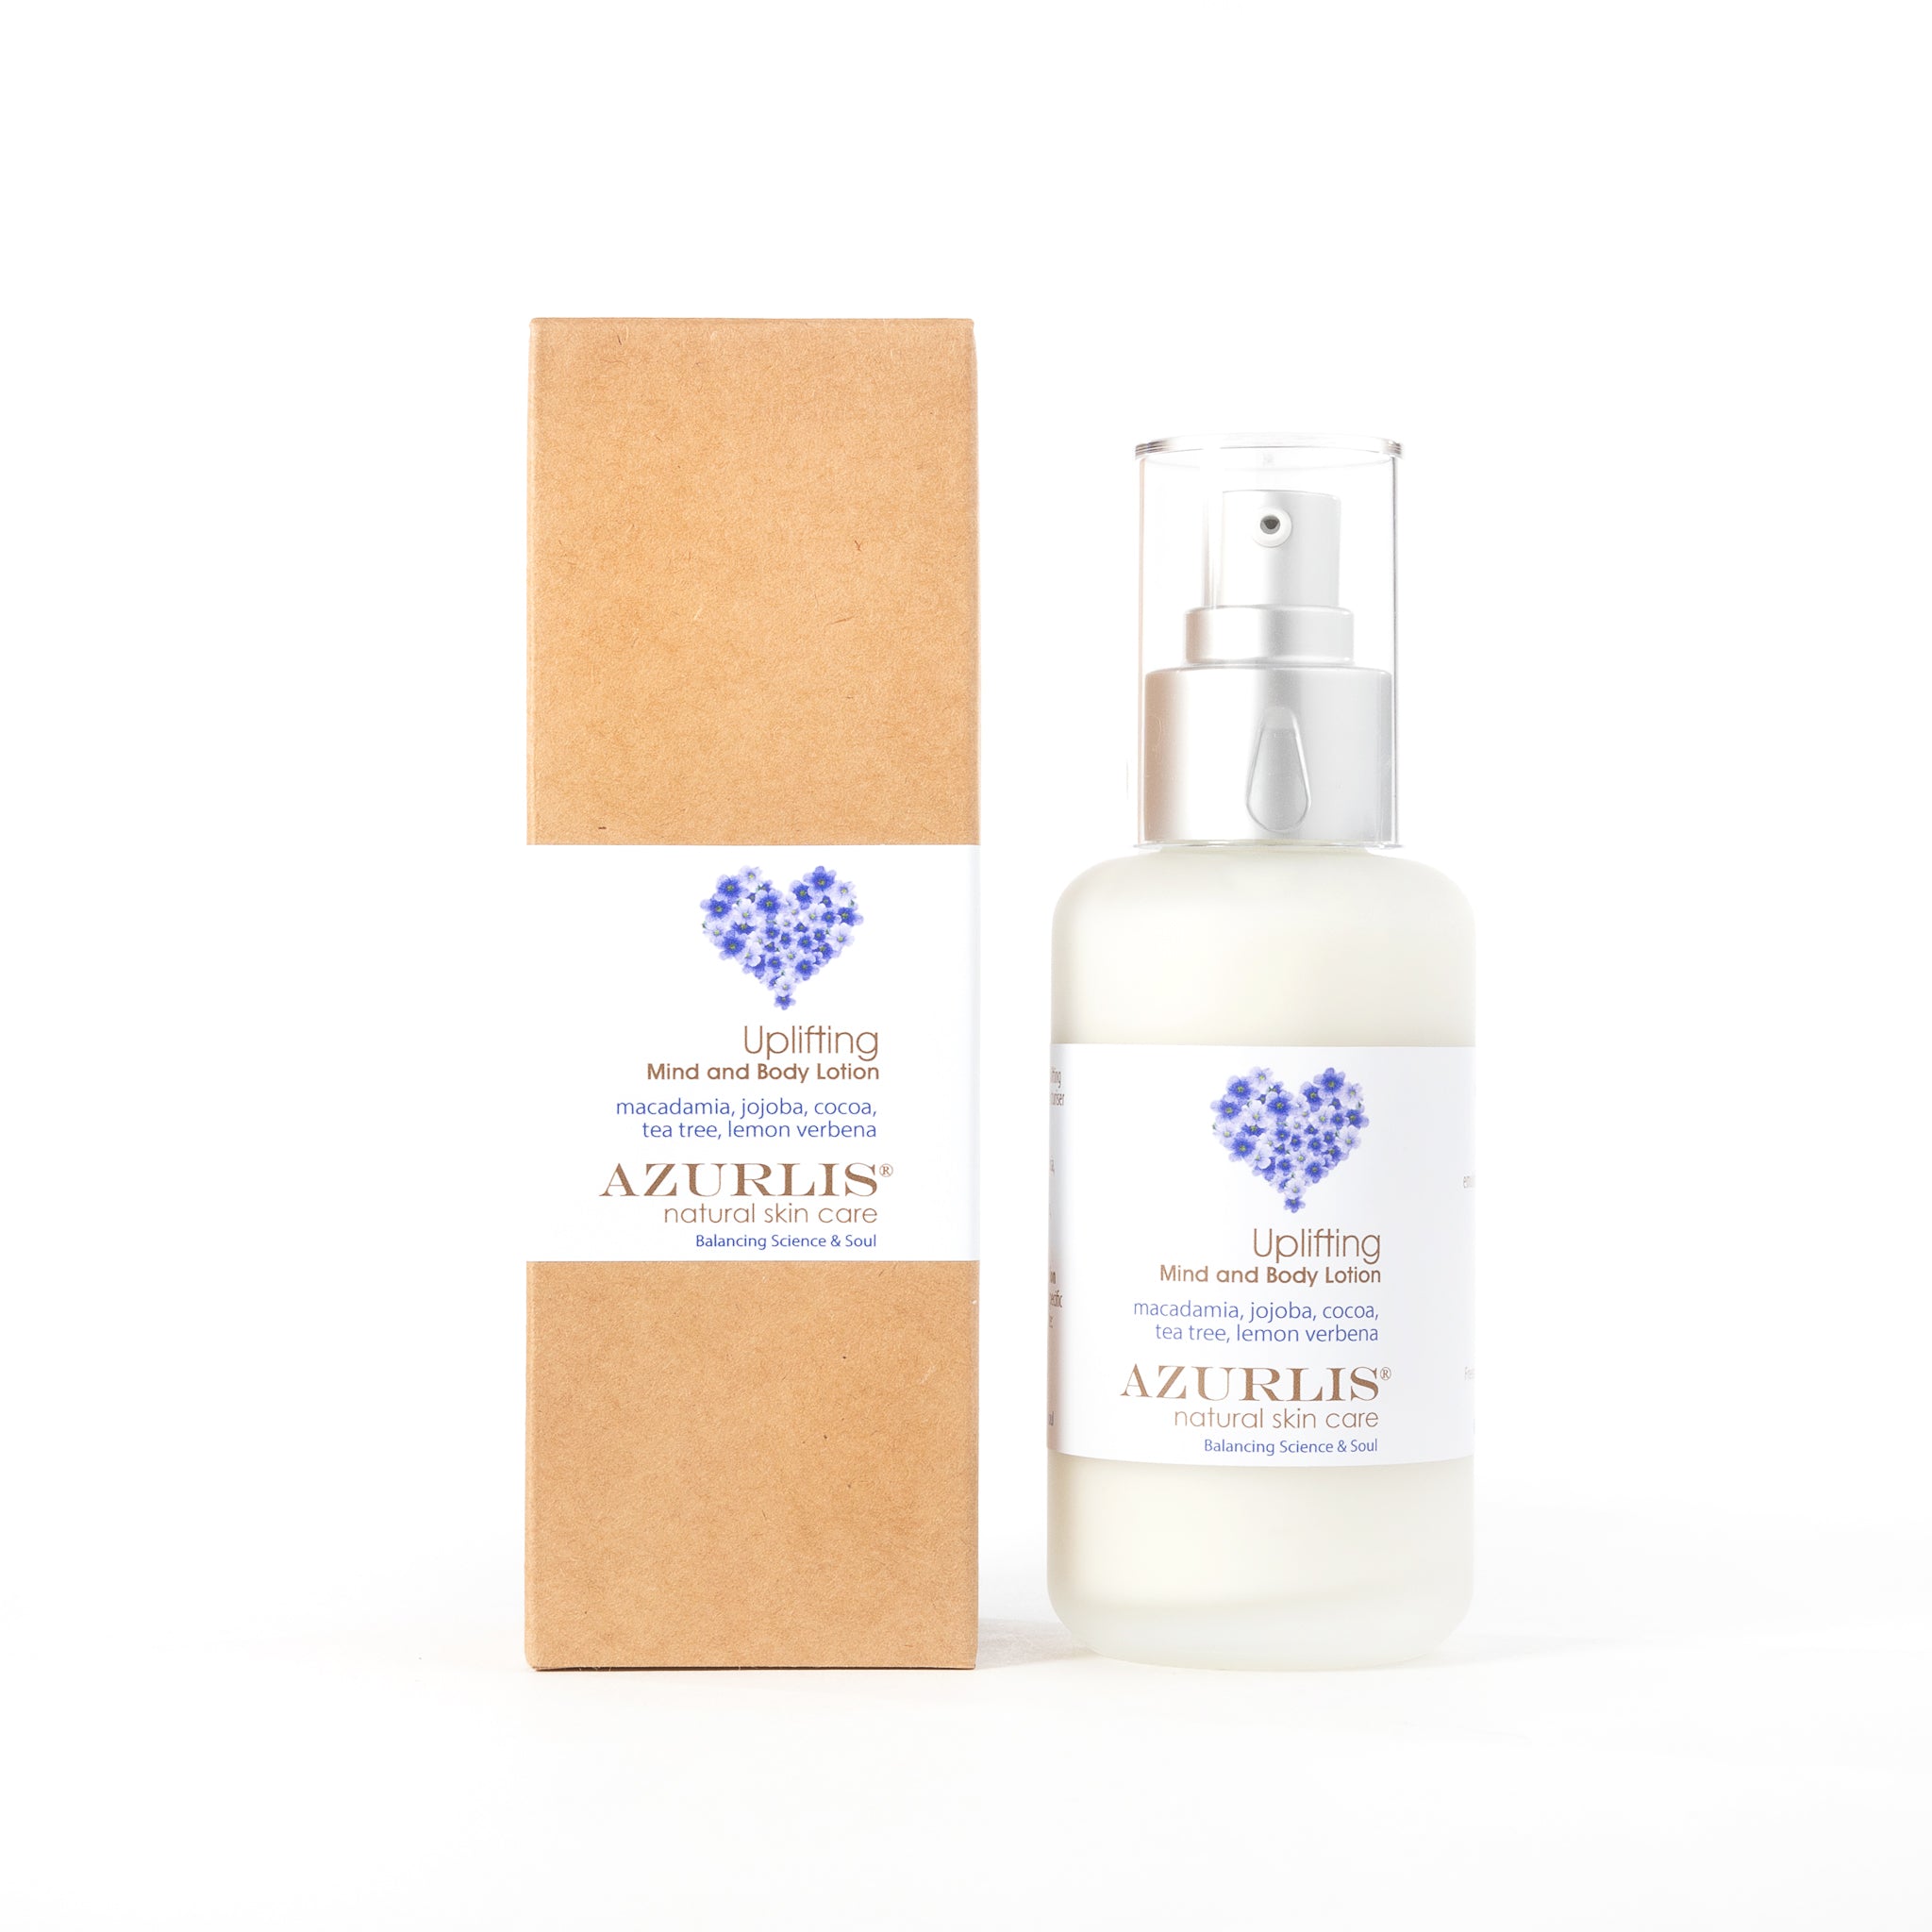 Azurlis™ Uplifting Mind &amp; Body Lotion 100ml provides a wonderful medium to protect the skin all over your body, including dry, hard to soften skin and fine abrasions, especially on your hands and feet. The softening and emollient properties of macadamia nut and jojoba oils are ideal to make your skin feel wonderfully moisturised and soft. NZ tea tree and lemon verbena essential oils are also shielding due to their mild antiseptic properties.